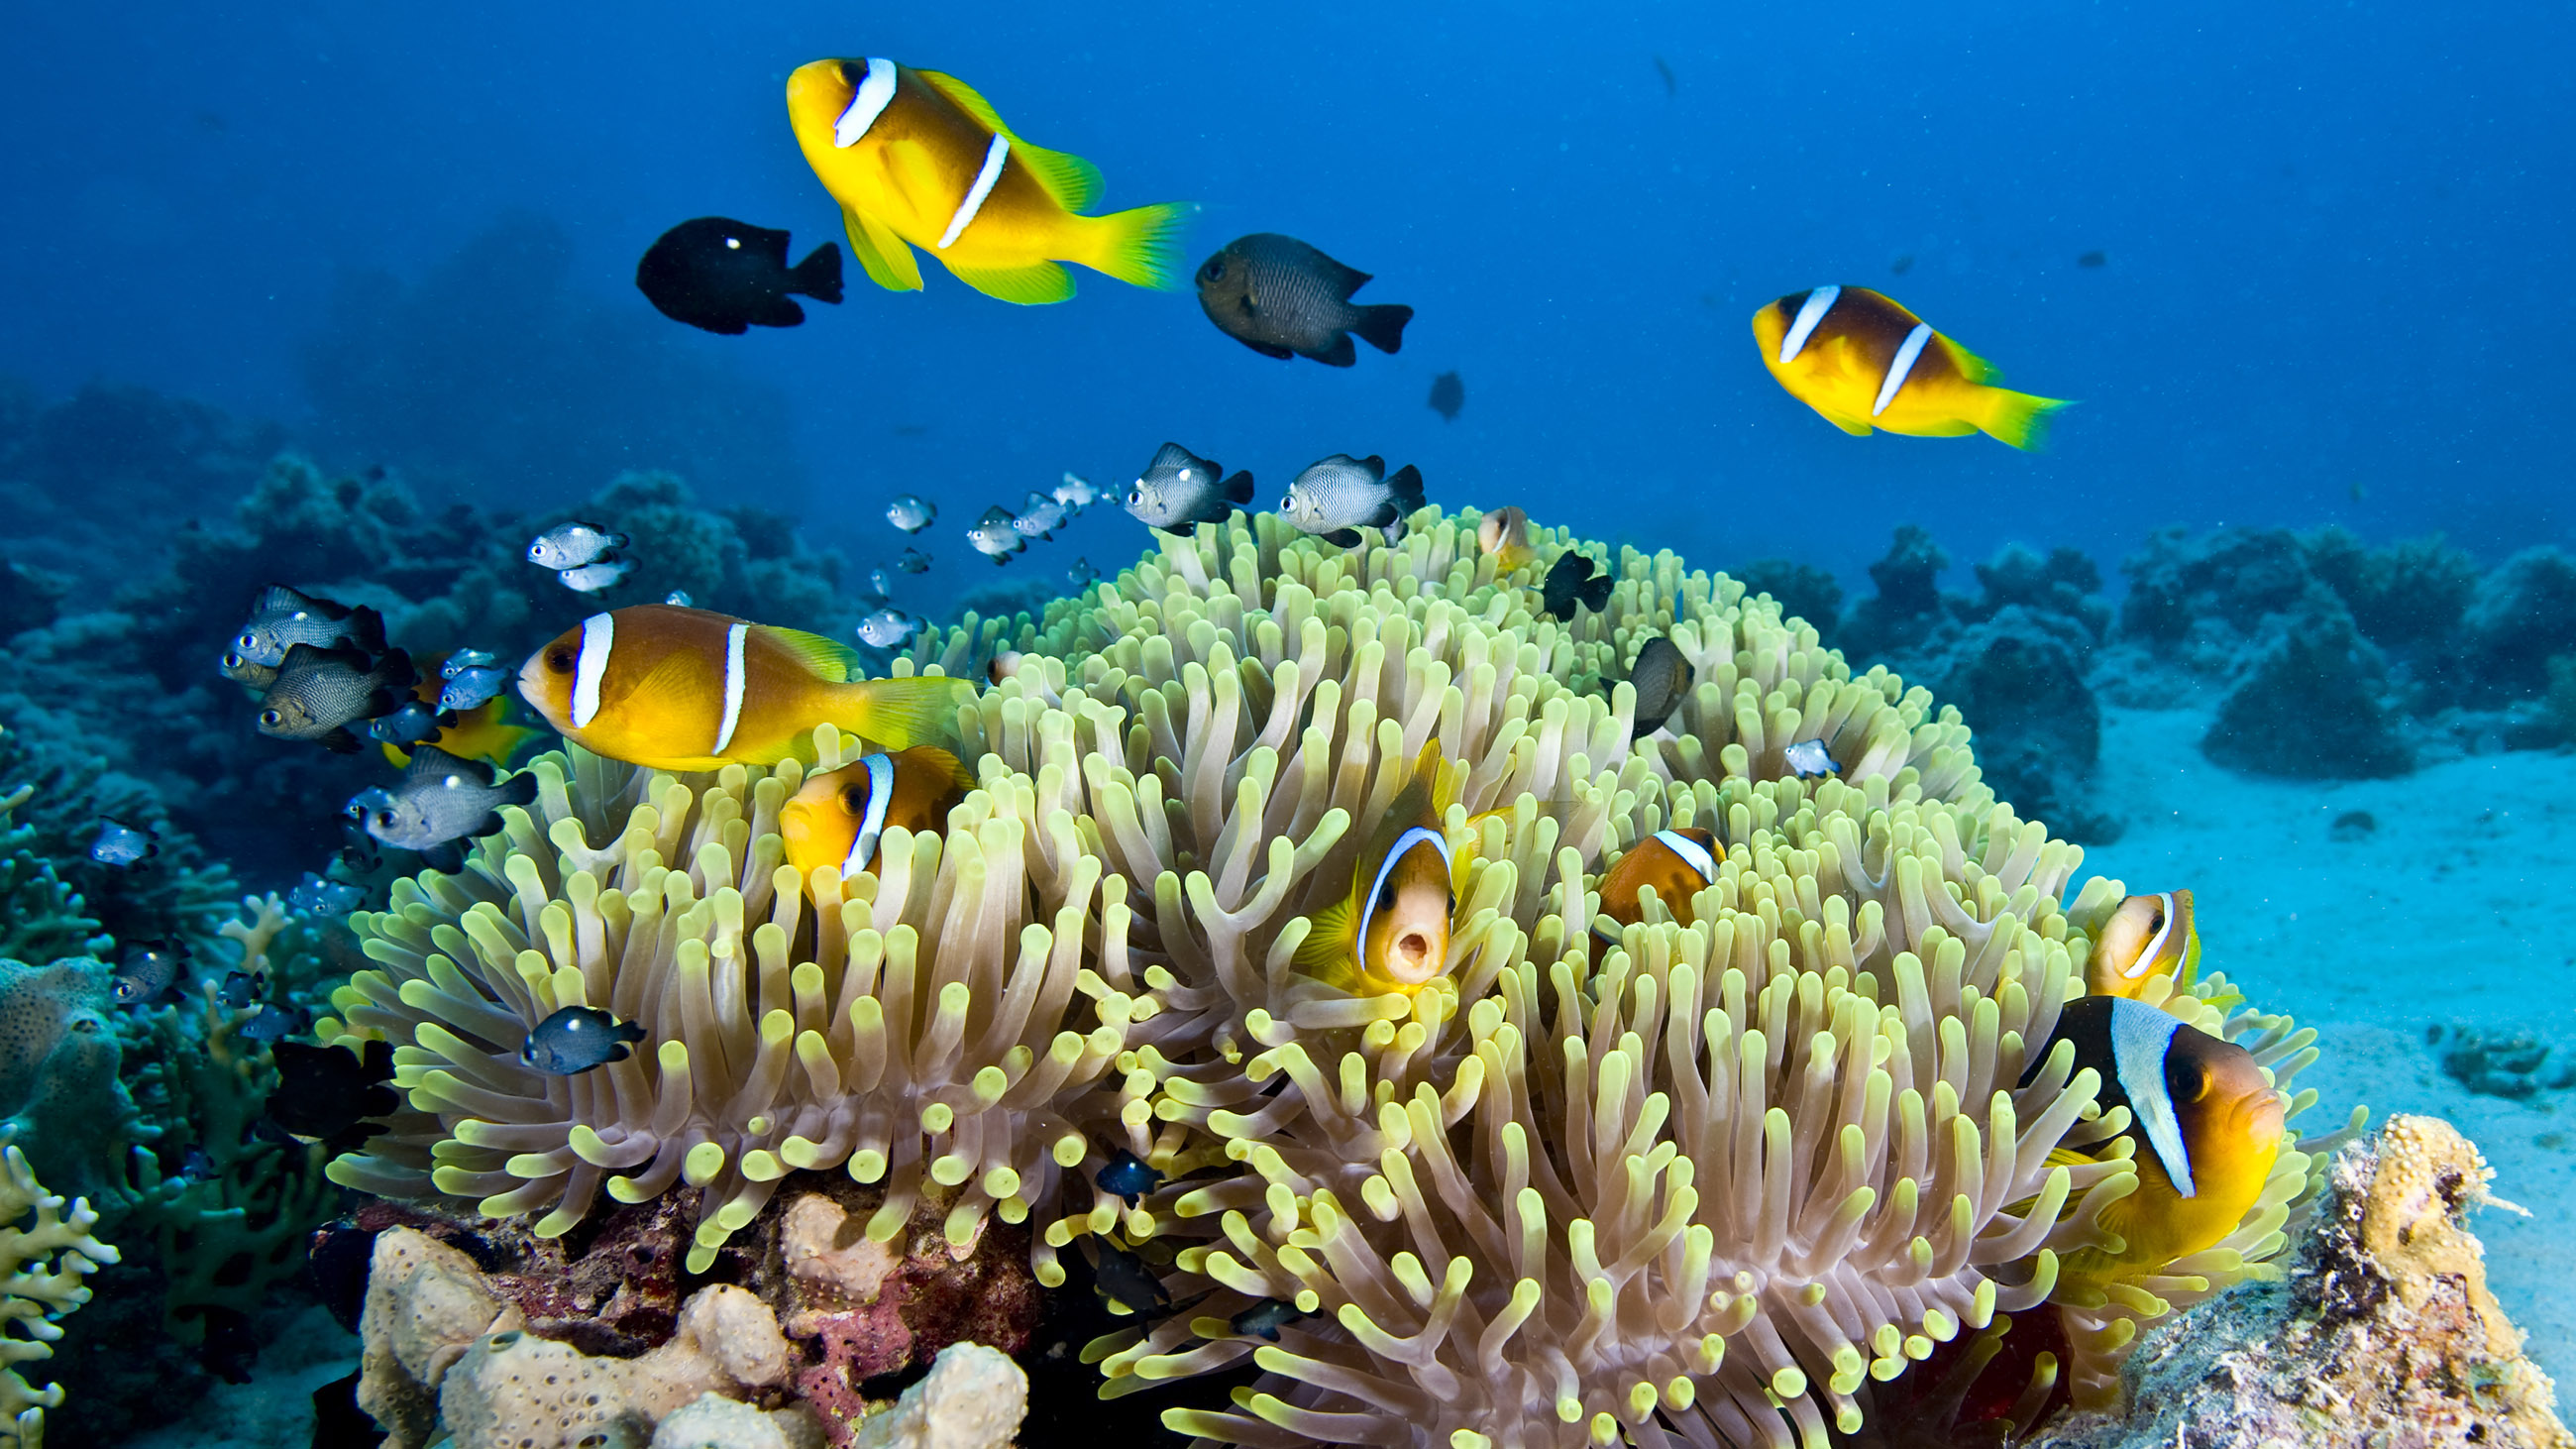 Twitter became a battleground last week after Outside Magazine published an irreverent “obituary” for the Great Barrier Reef.